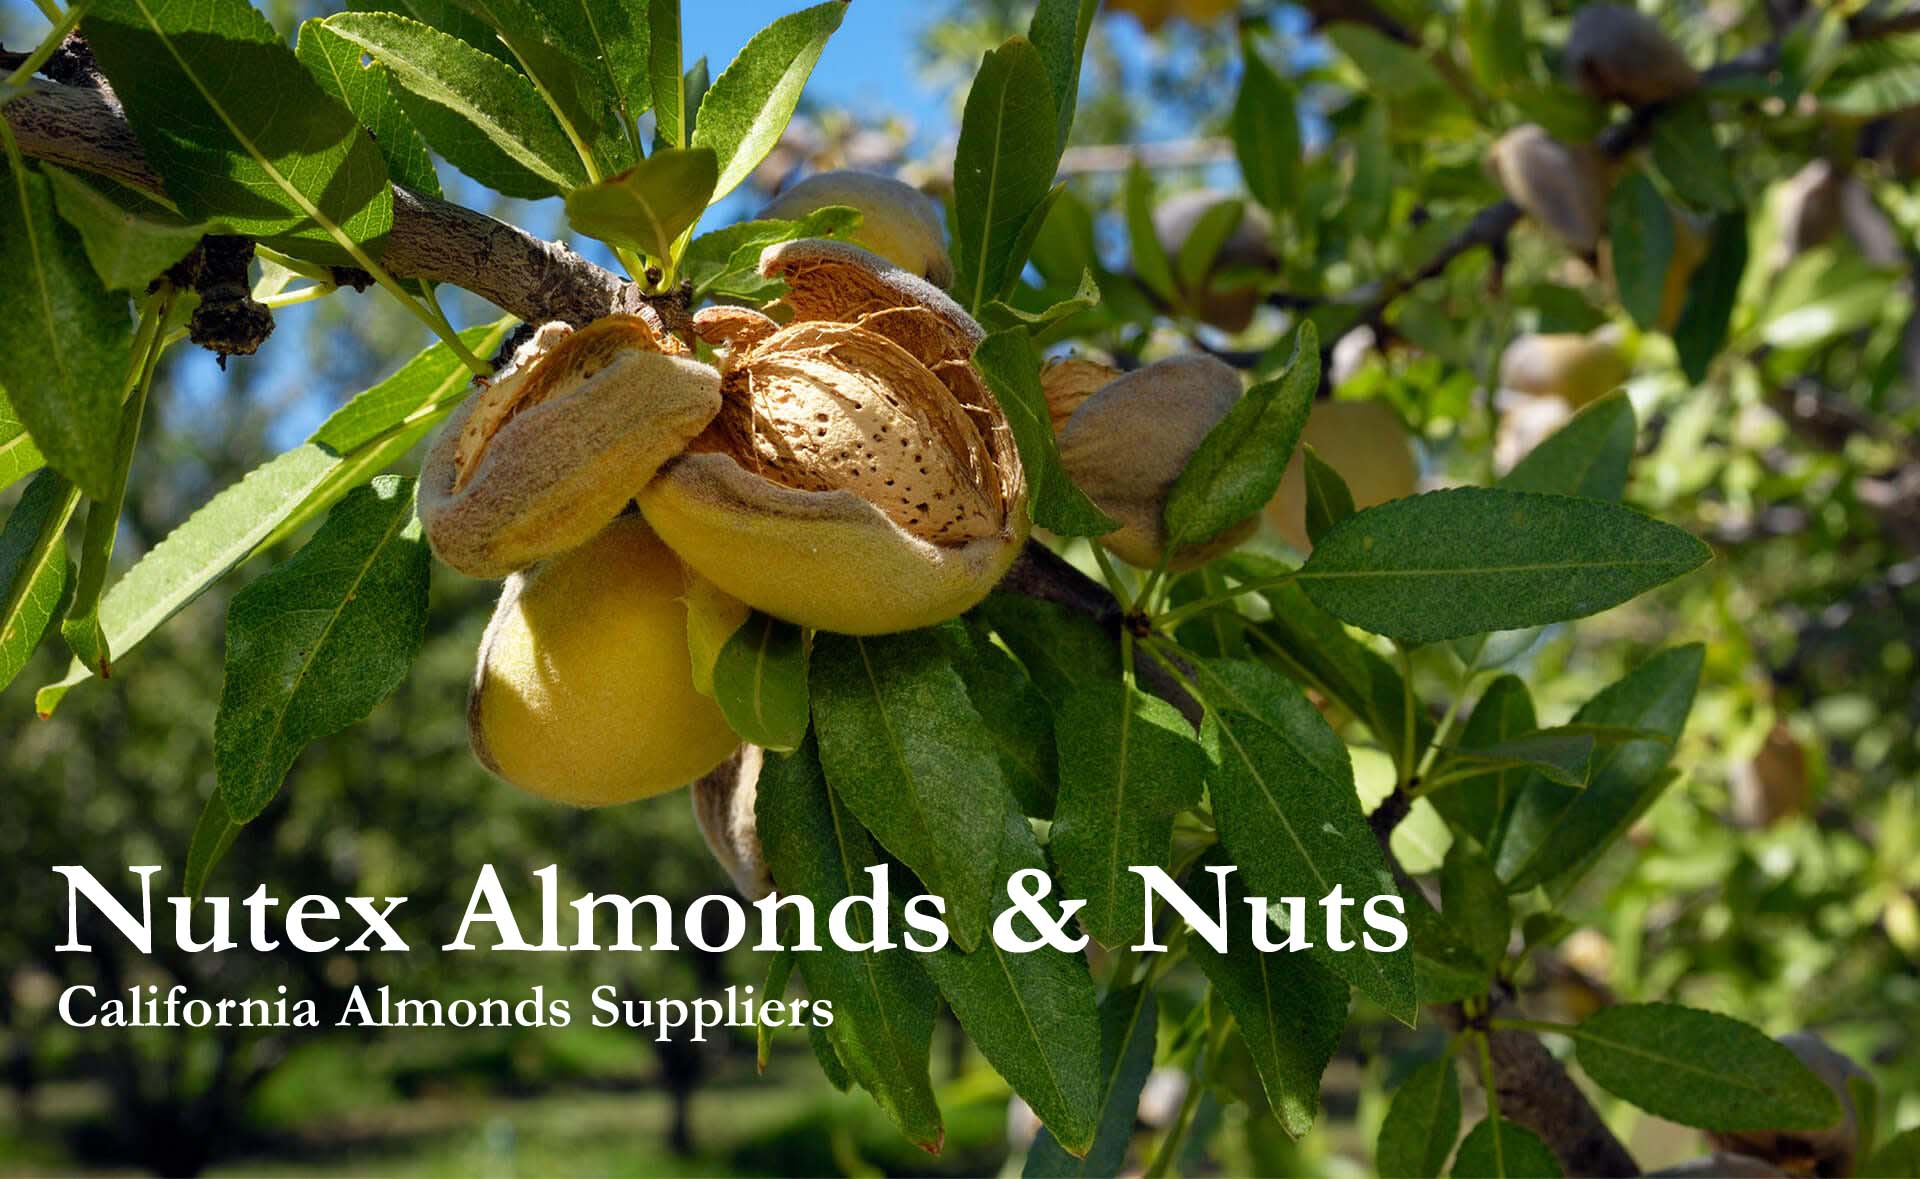 California's Largest Almond Suppliers - Nutex Almonds